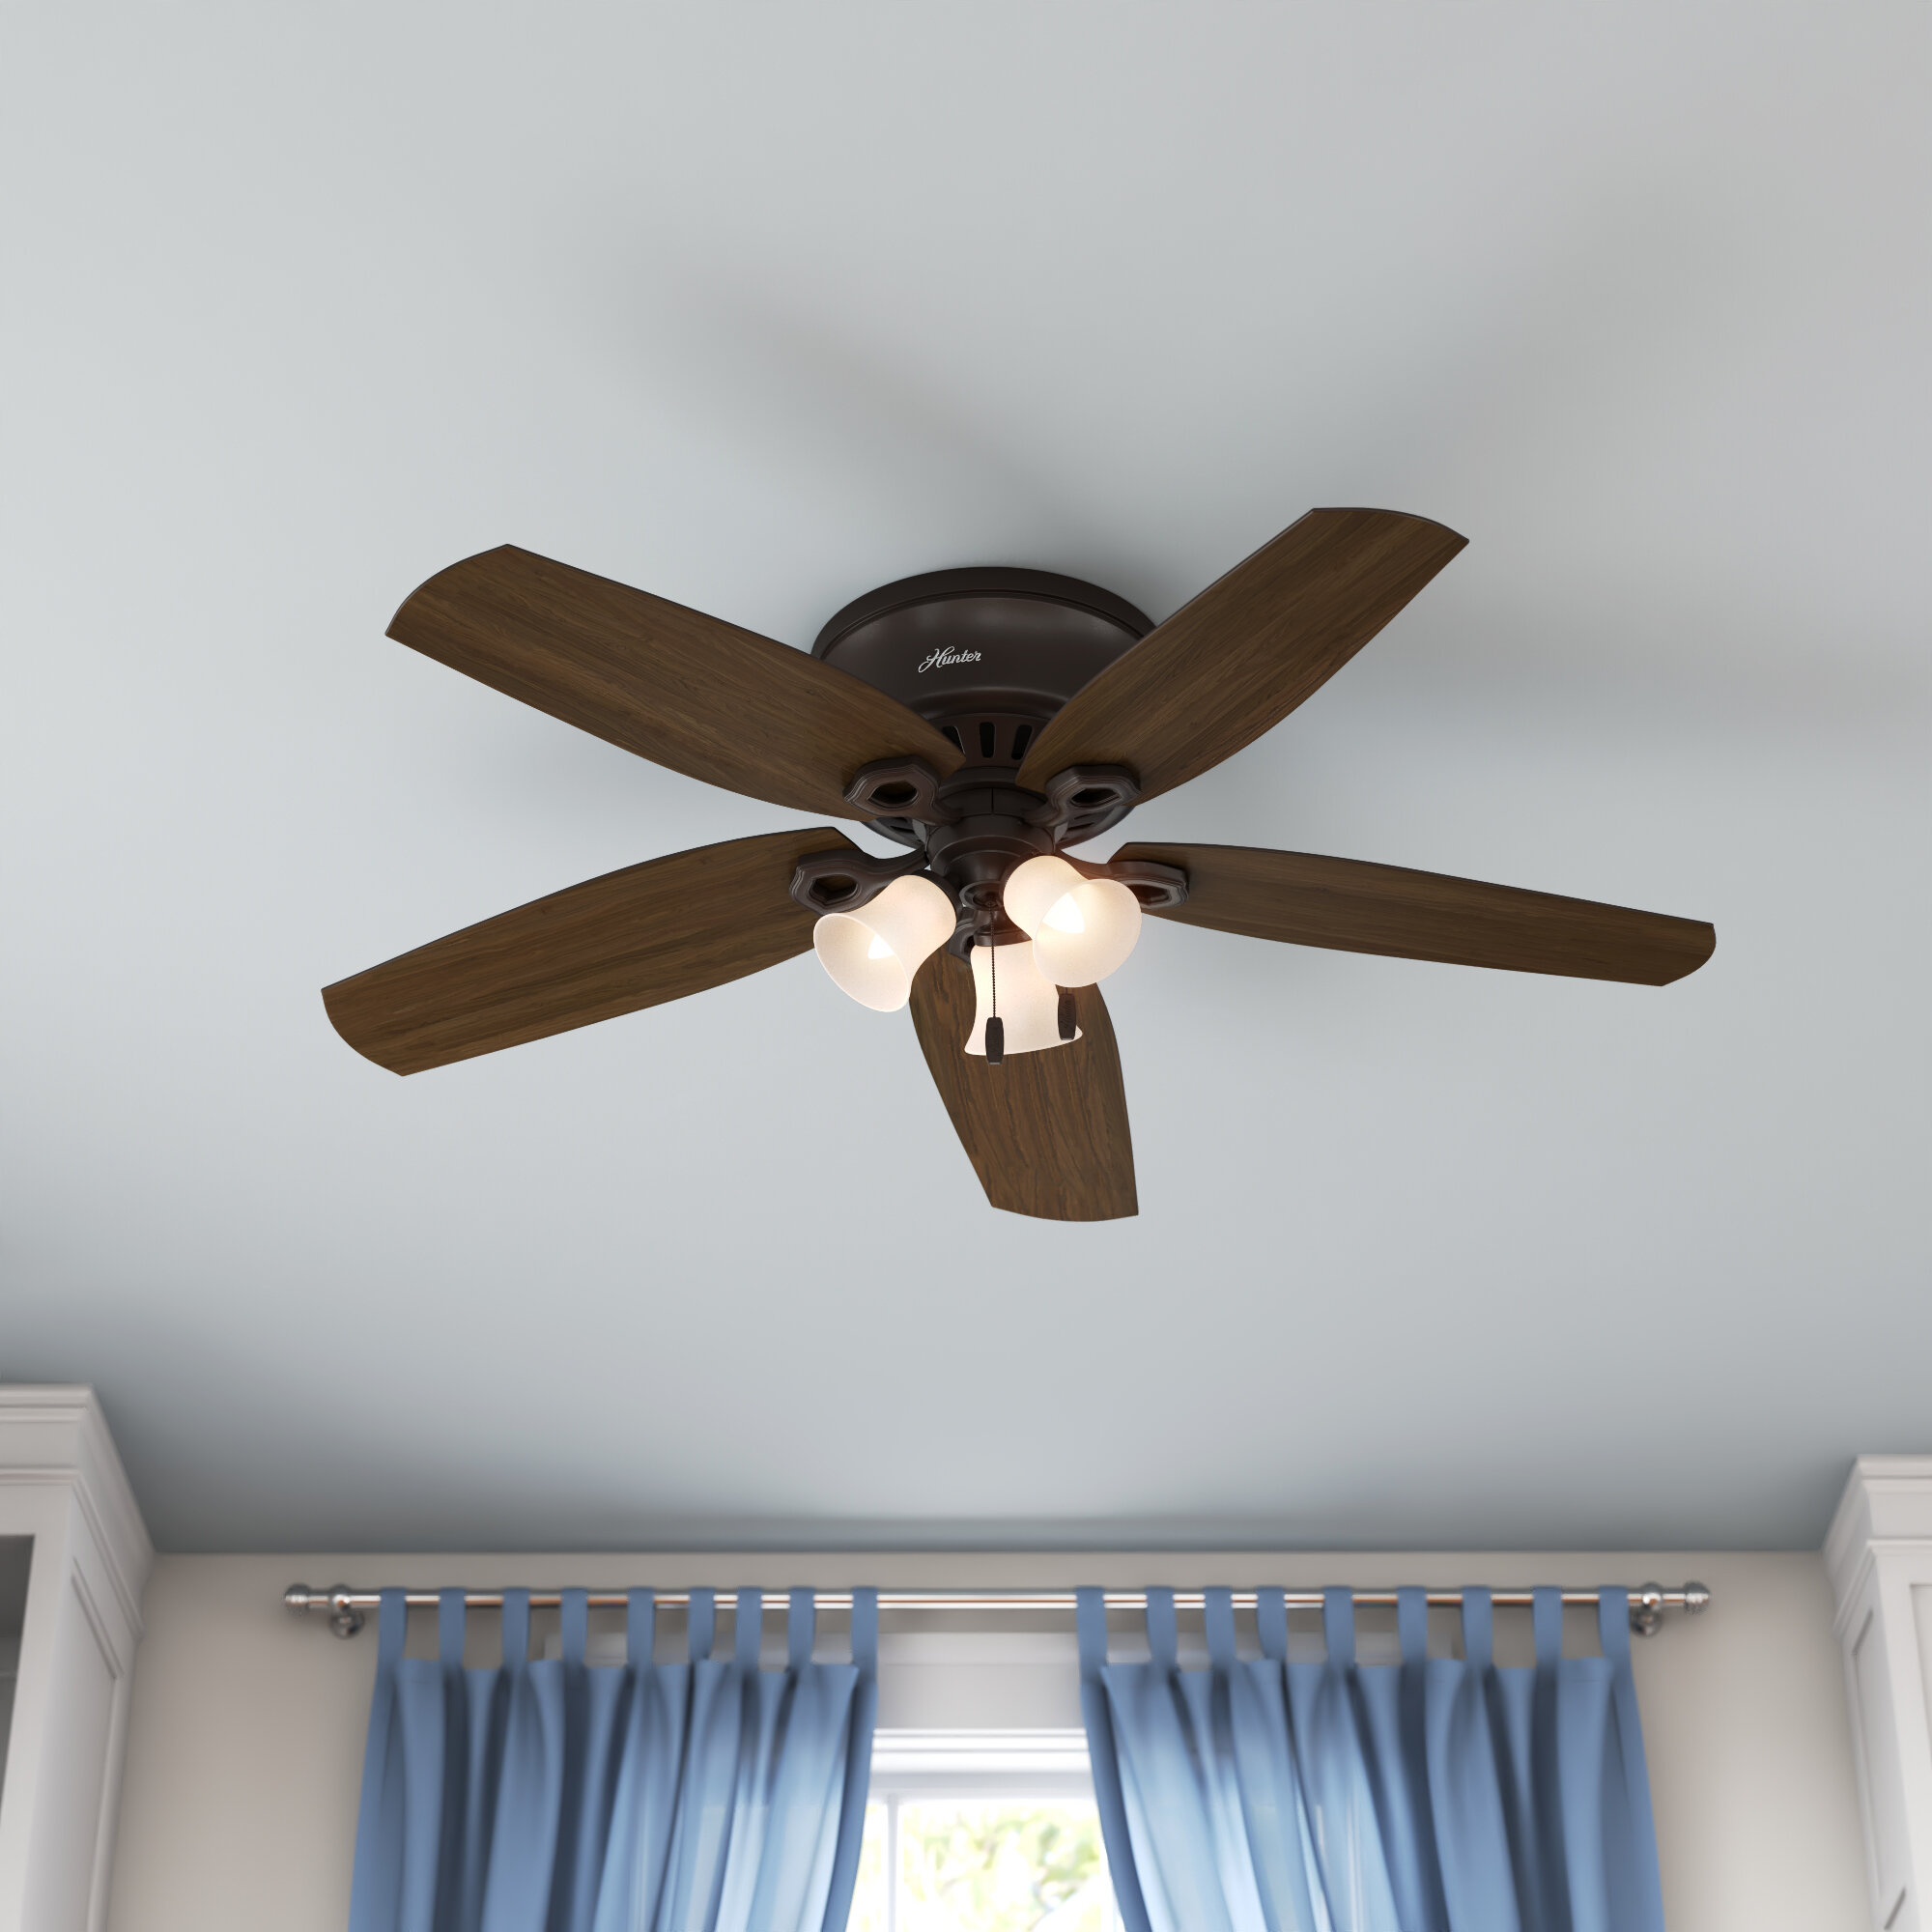 Details about   Hunter Fan 52 in Low Profile Noble Bronze Ceiling Fan with Light and Pull Chain 